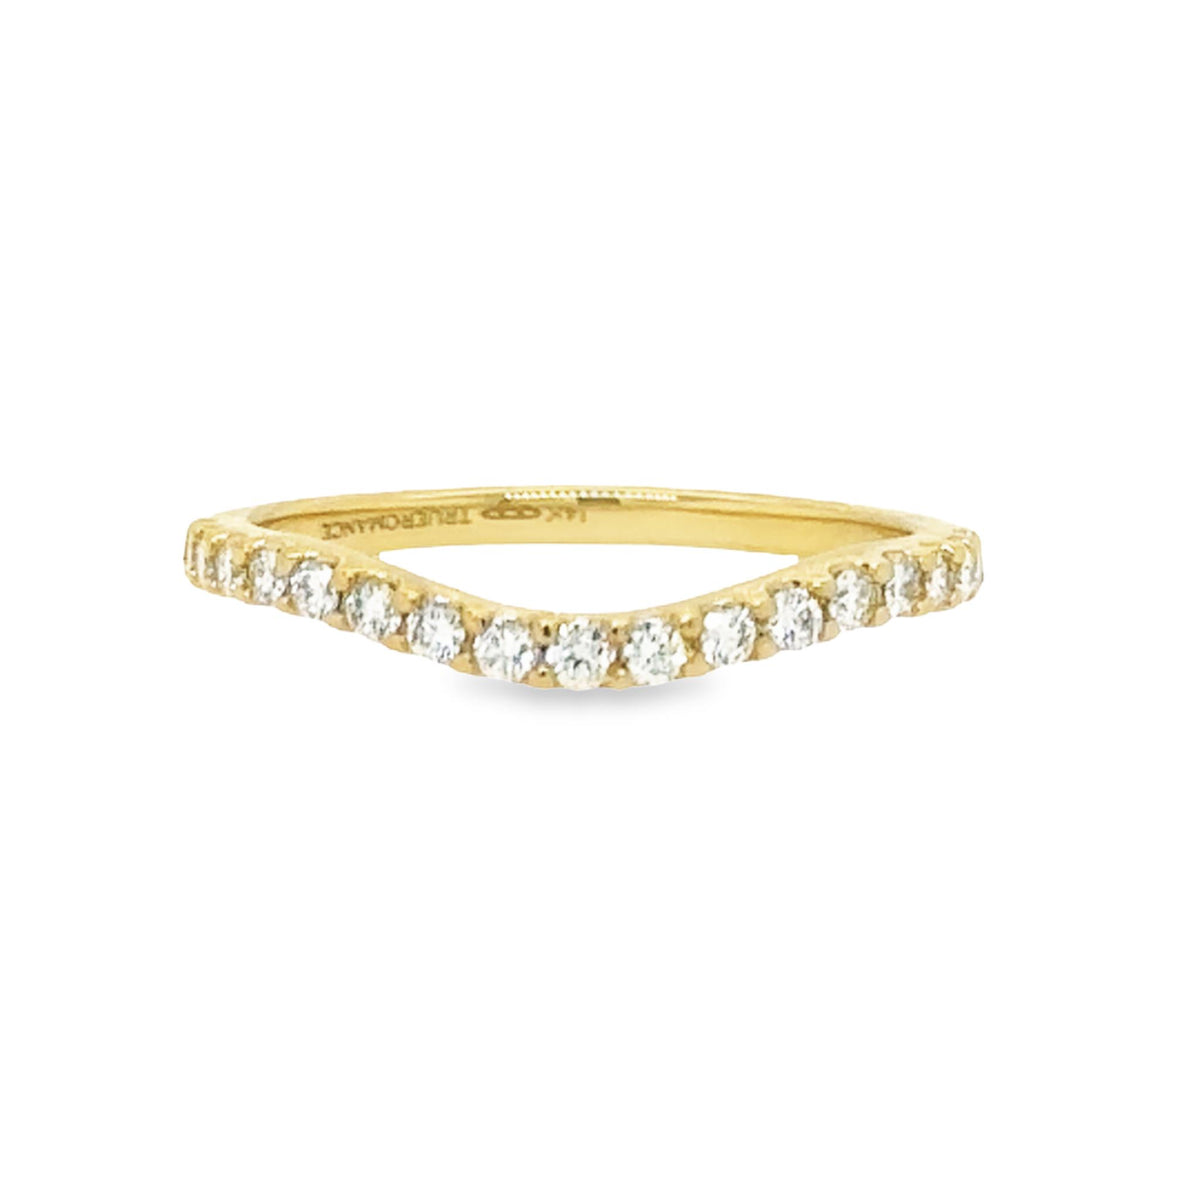 14Kt Yellow Gold Curved Wedding Ring With 0.51cttw Natural Diamonds